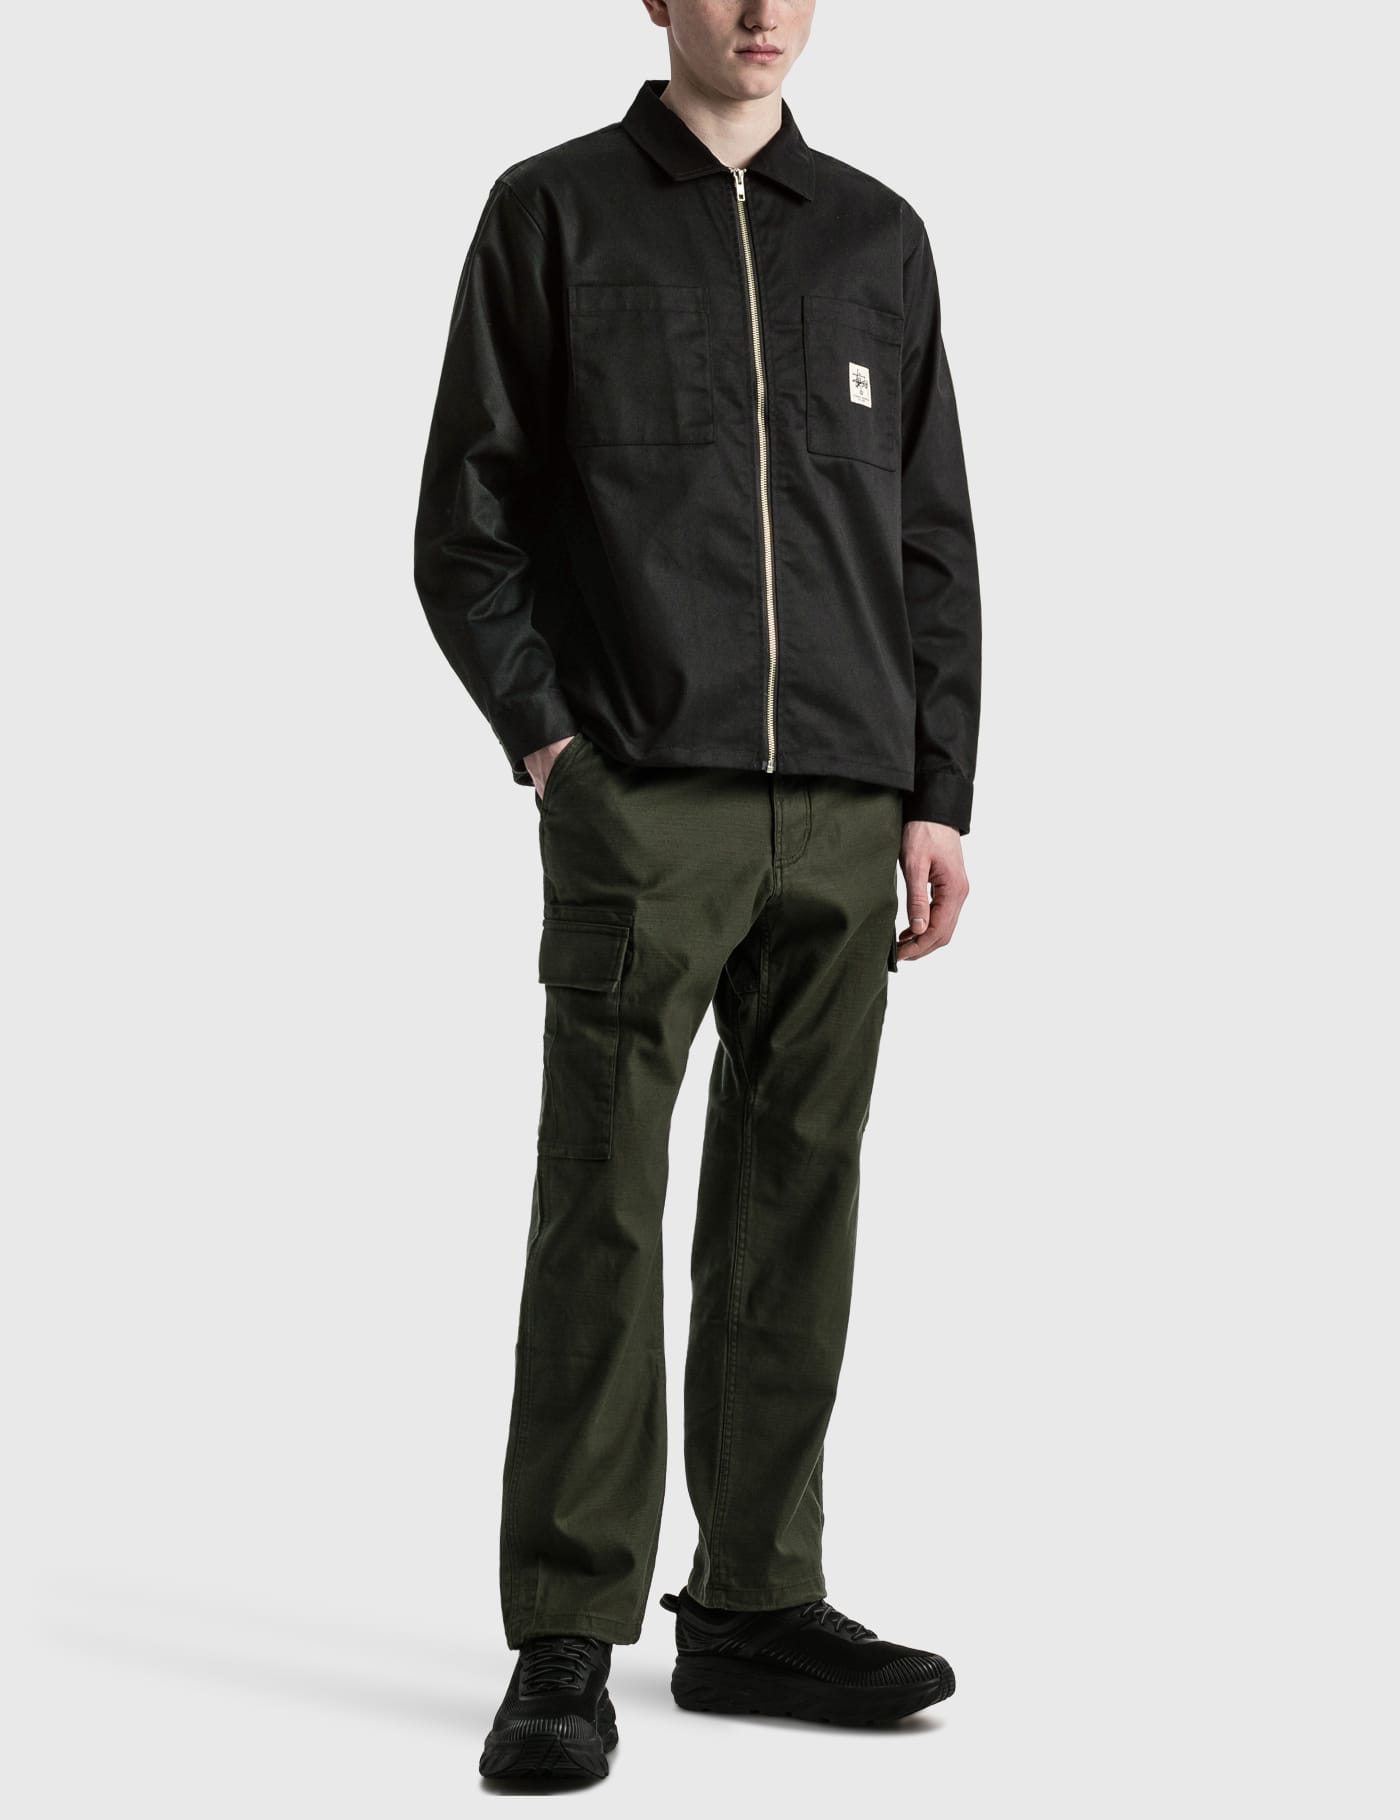 Stüssy - Zip-Up Work Shirt | HBX - Globally Curated Fashion and 